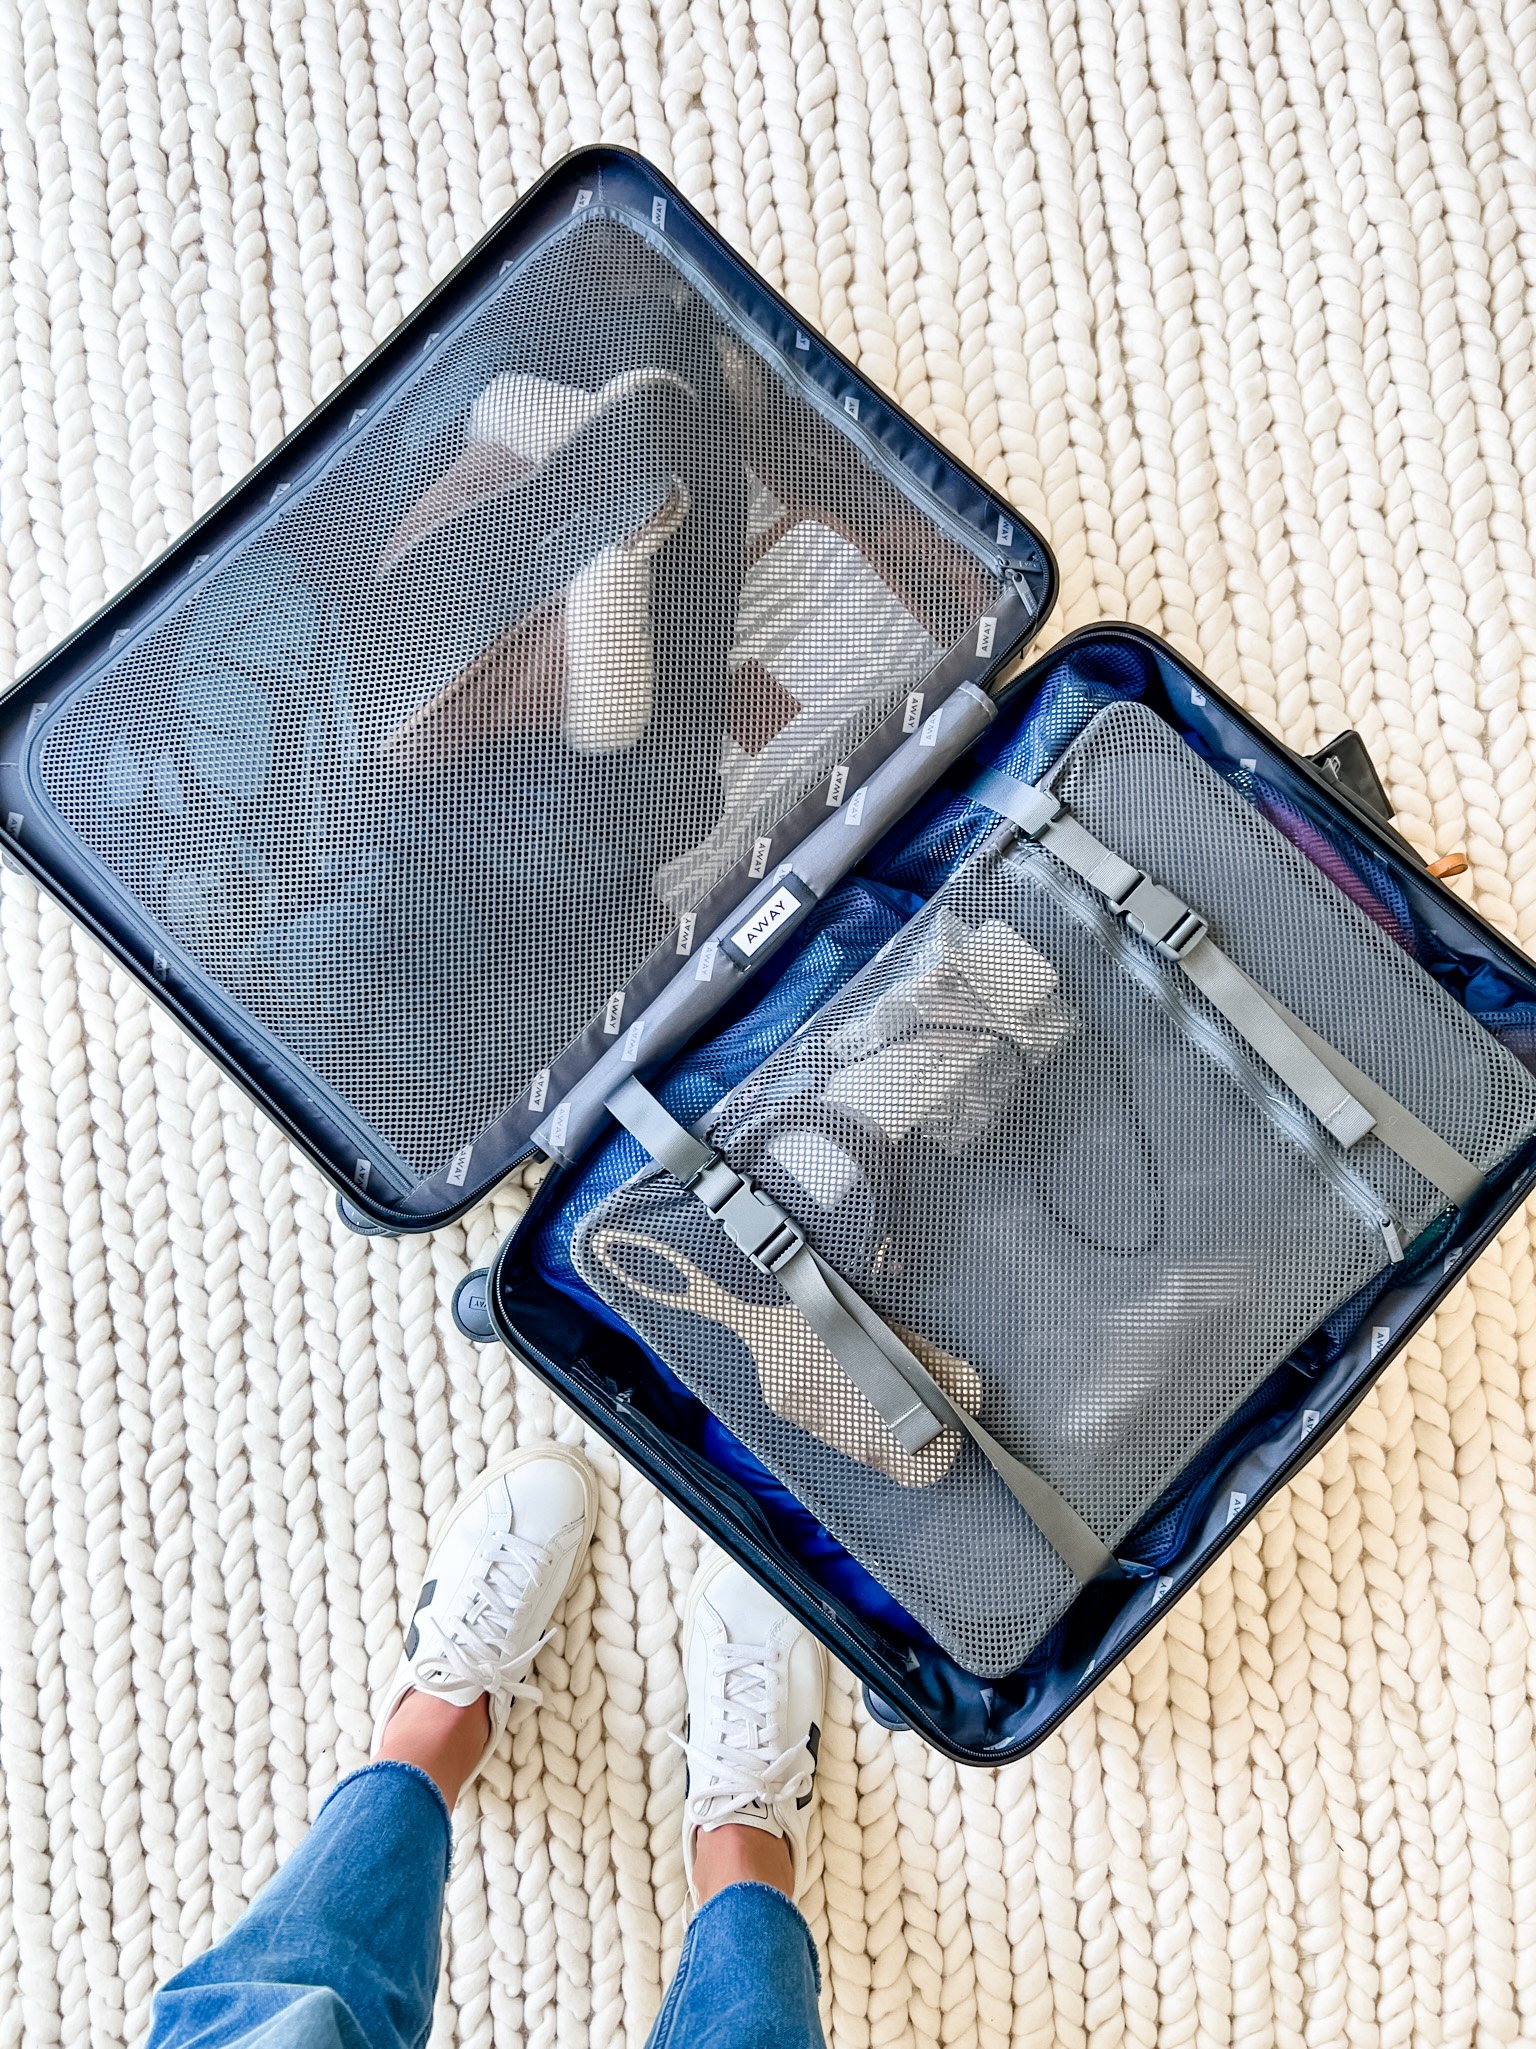 packing tips to only take a carry-on bag